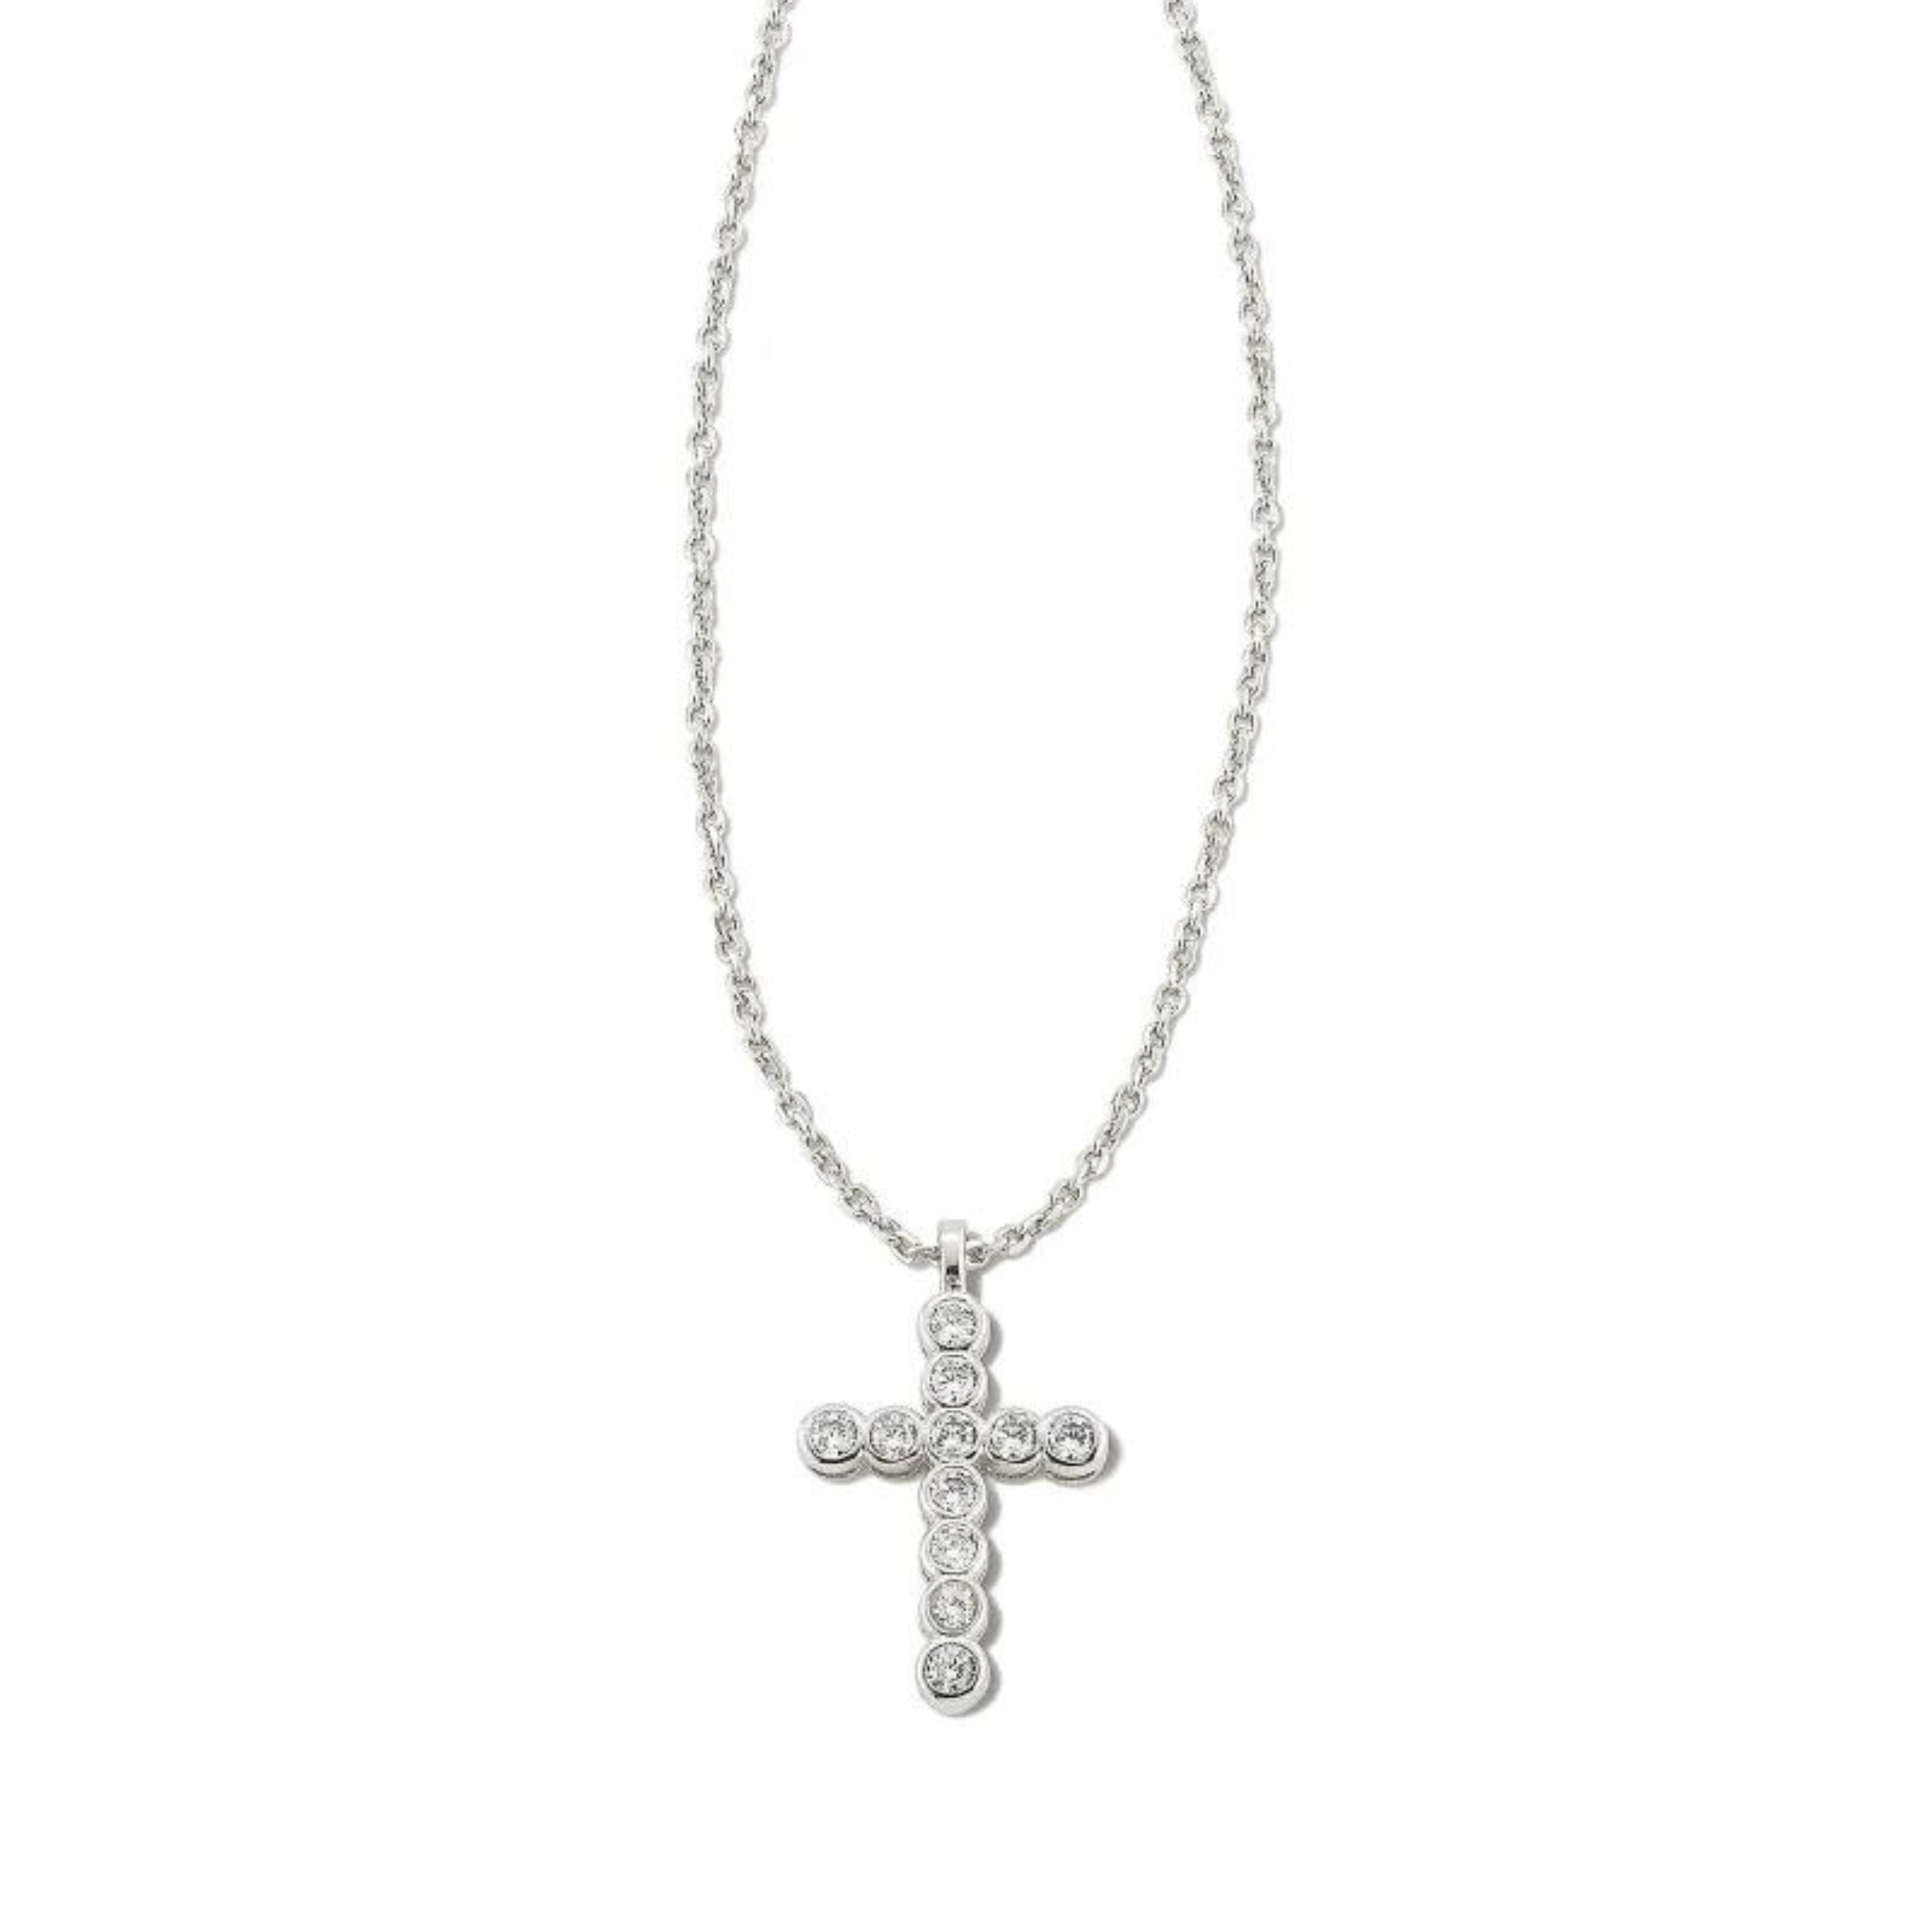 Silver necklace with white crystal cross pendant, pictured on a white background.